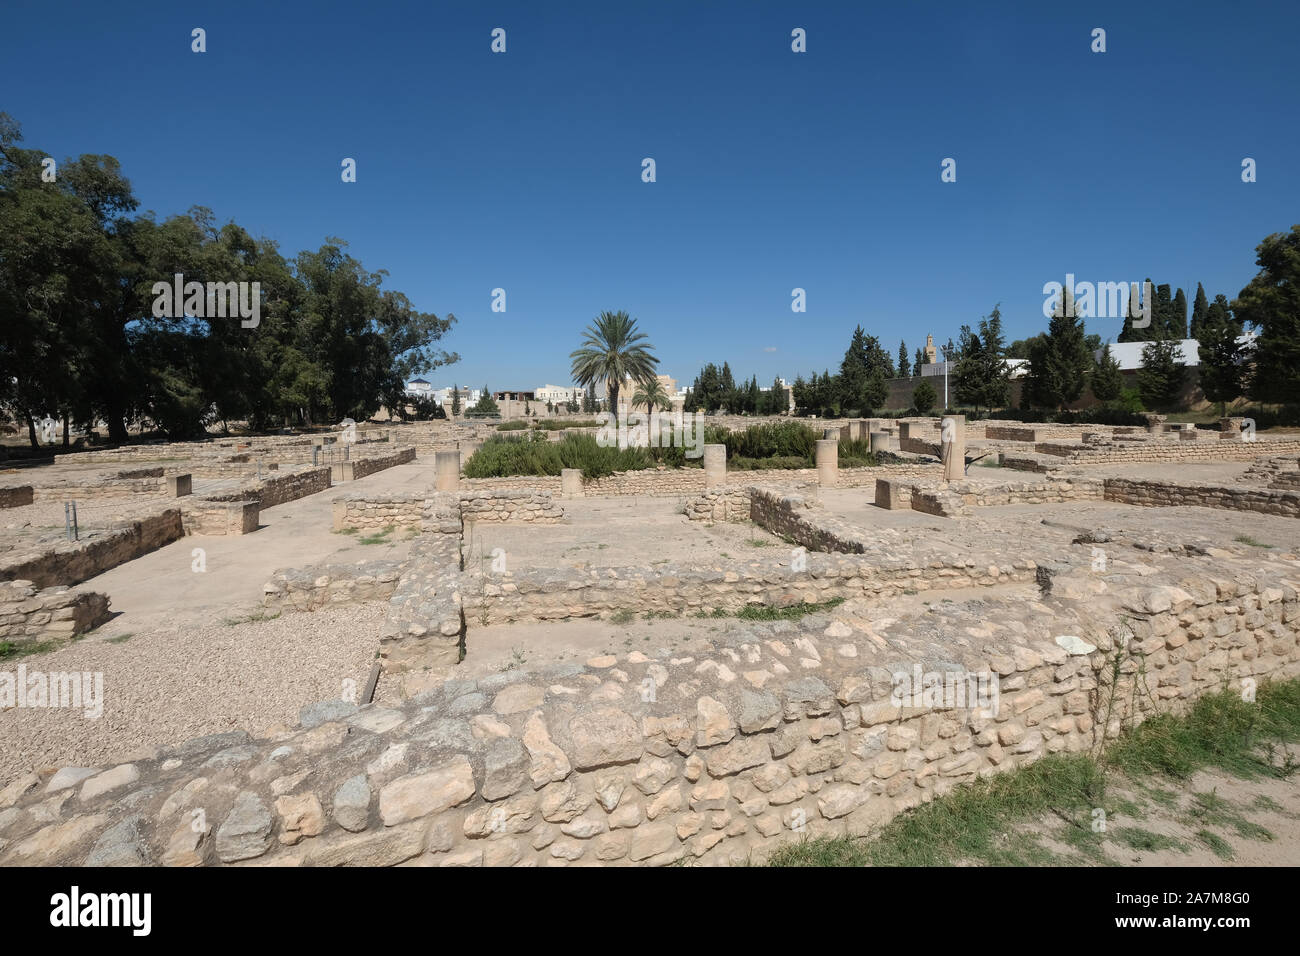 Roman ruins in the grounds of the Archaeological Museum at El Jem or El Djem,Tunisia Stock Photo